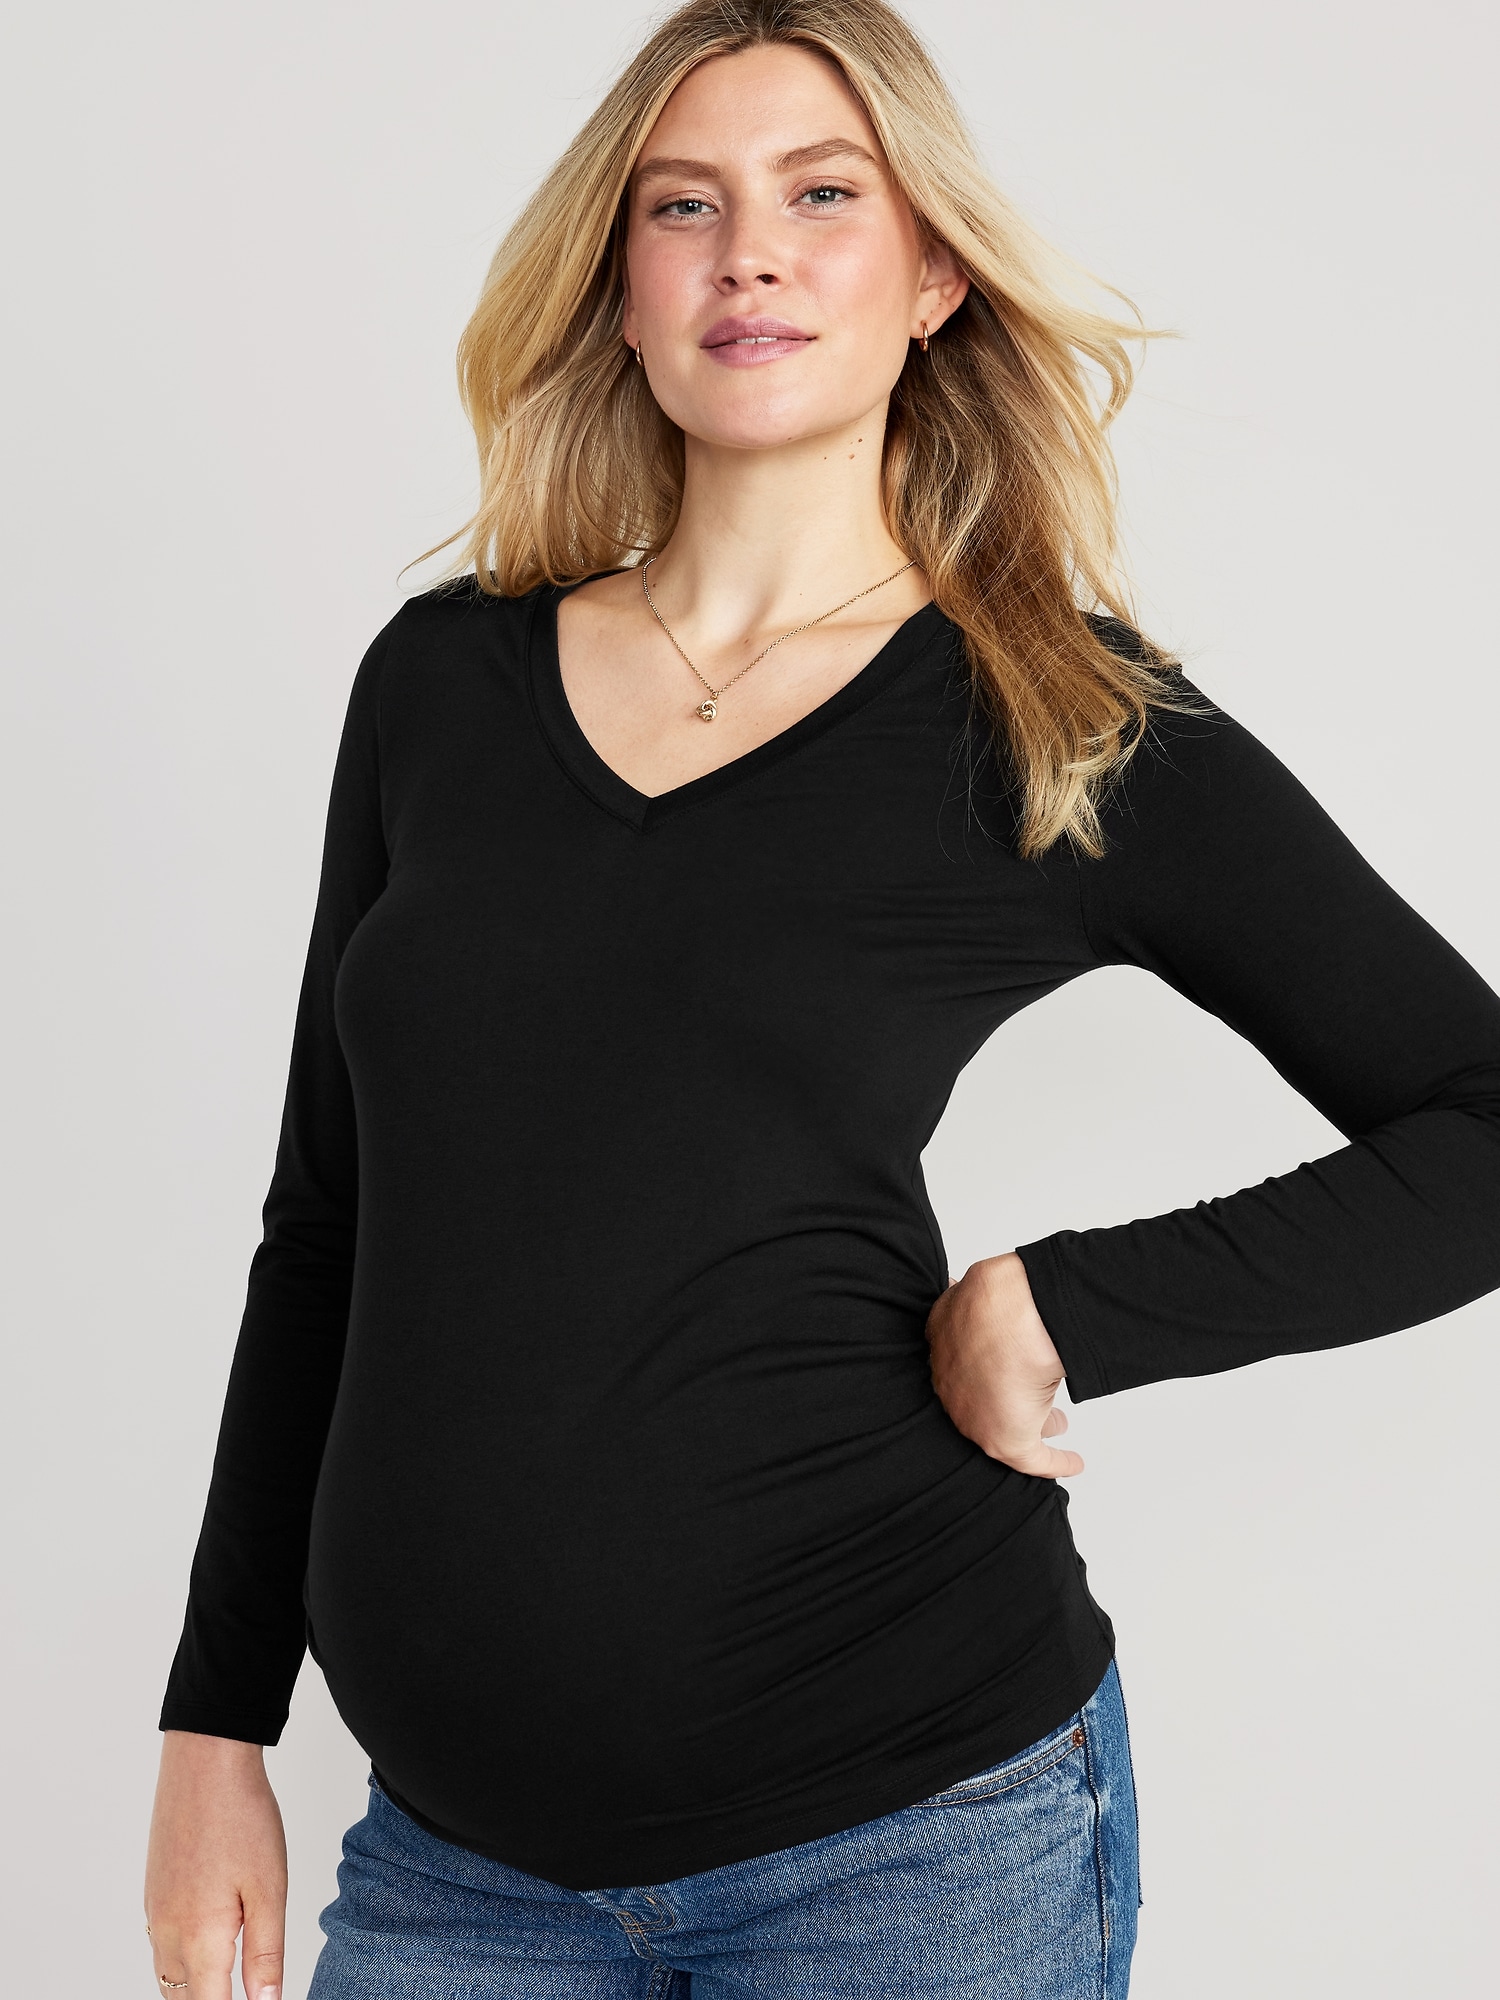 Maternity 2-Pack EveryWear Fitted V-Neck T-Shirt | Old Navy